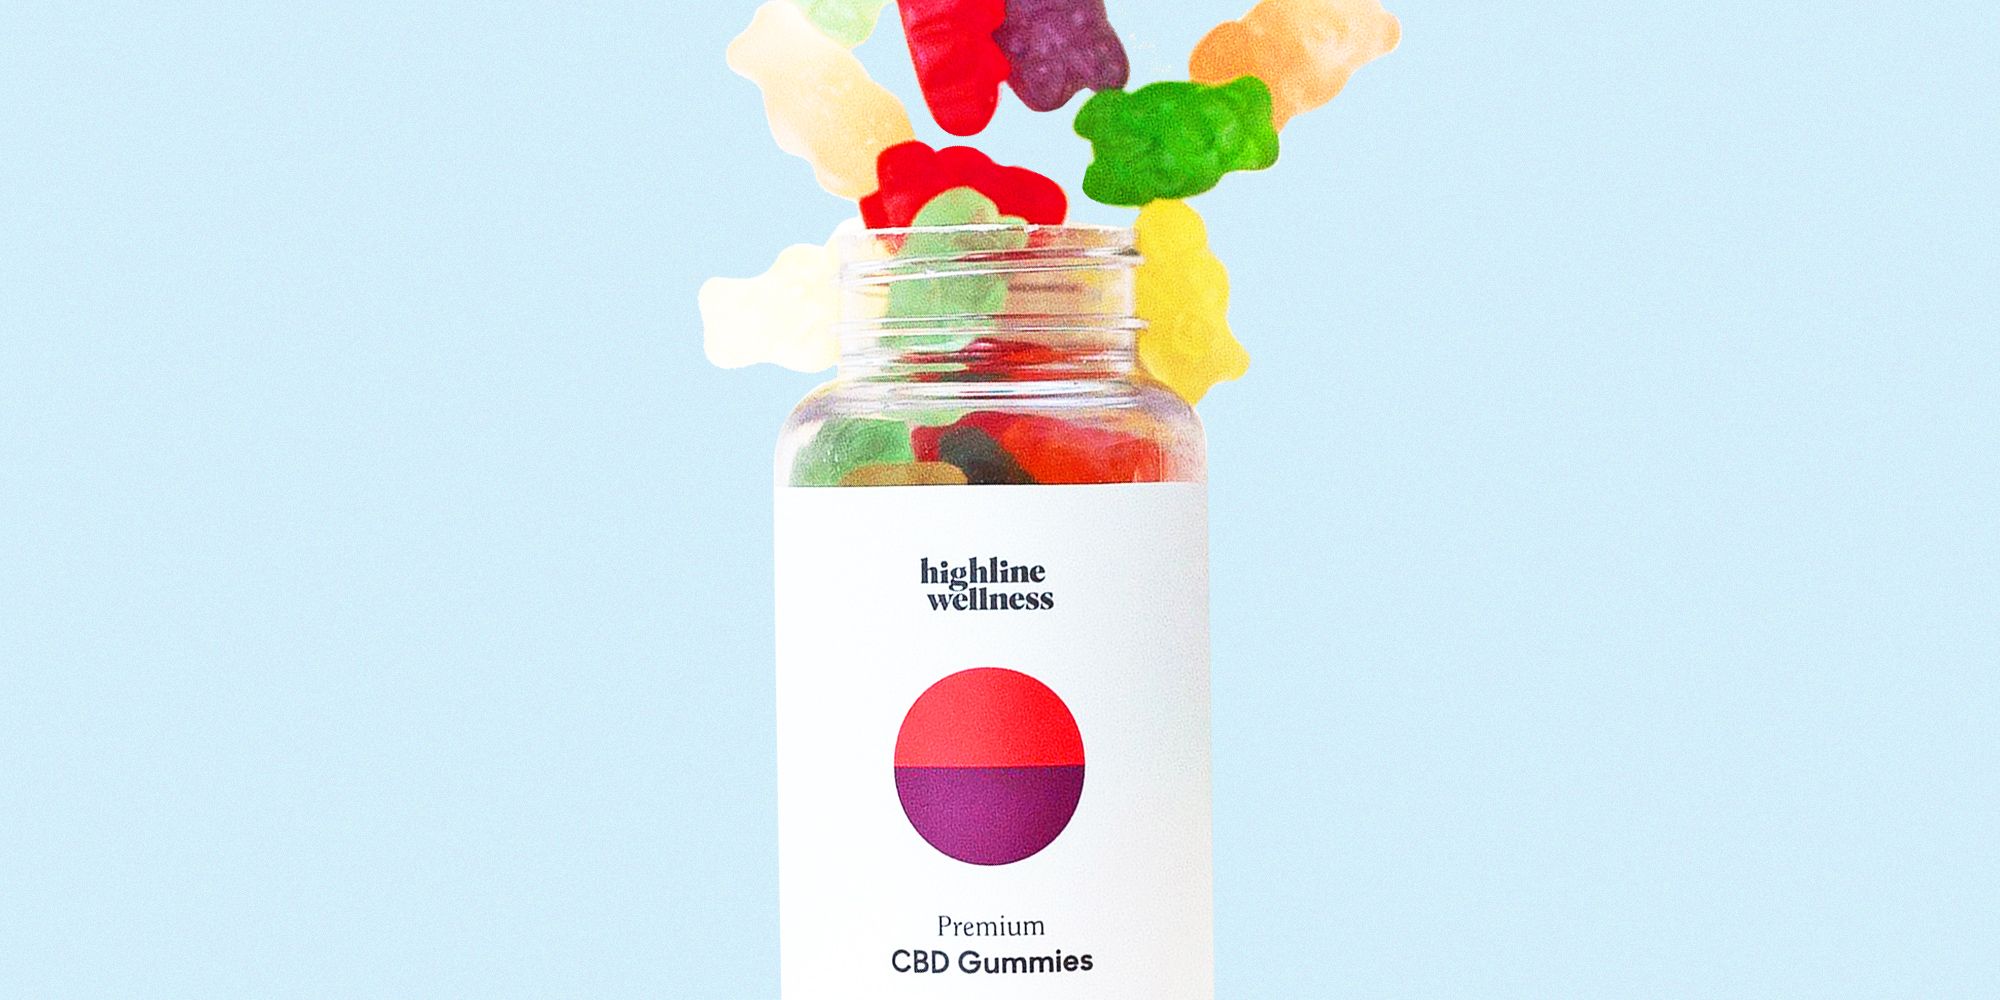 What Makes a CBD Gummy Ideal for Daily Wellness Routines?